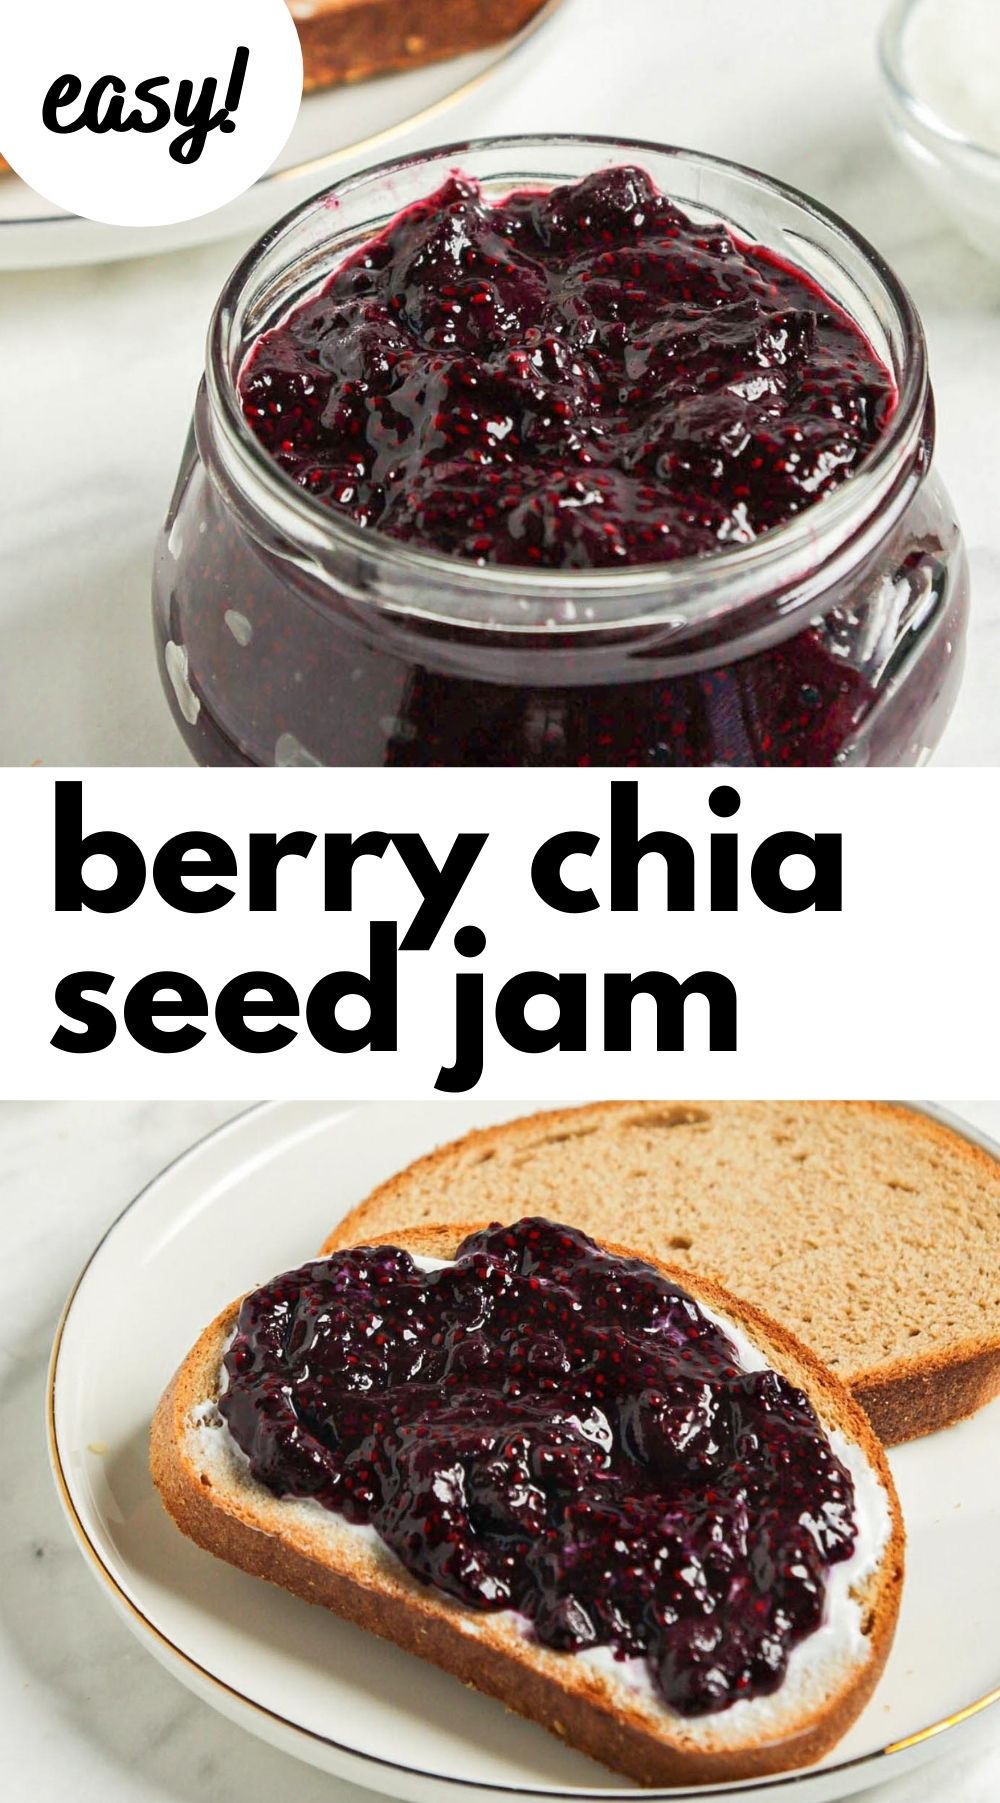 Pinterest graphic with an image and text for chia seed jam.